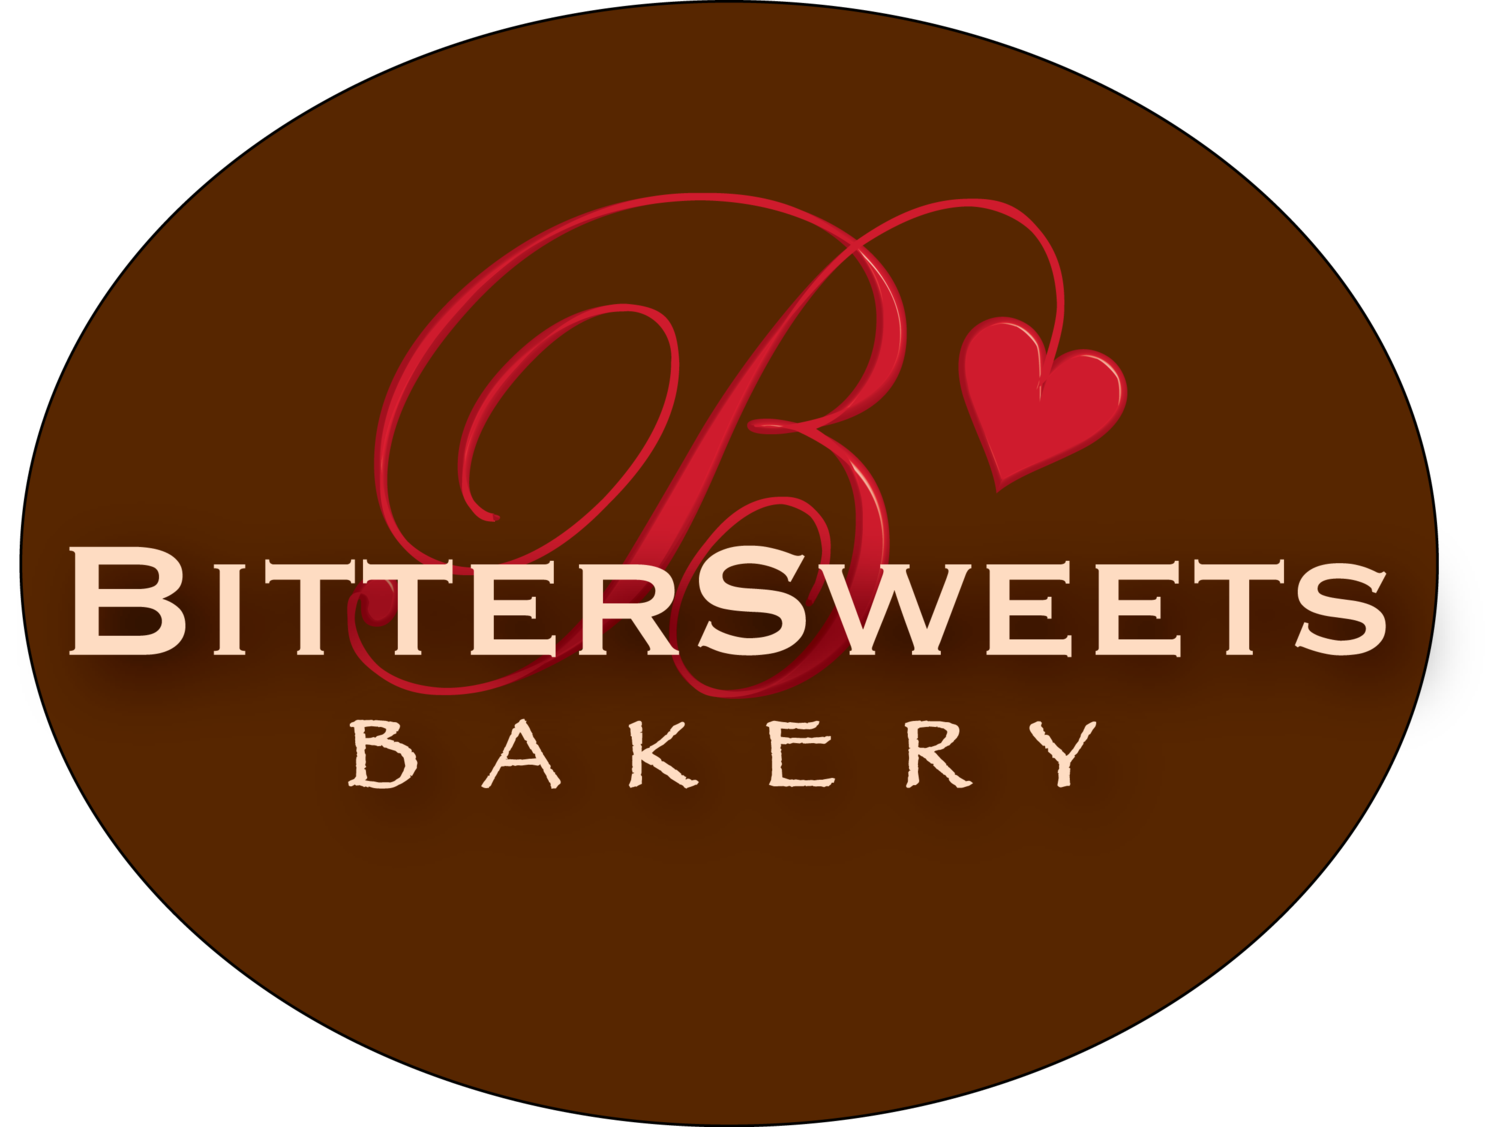 BITTERSWEETS BAKERY featuring STUNNING WEDDING CAKES, Gourmet Cupcakes made from Scratch Everyday!